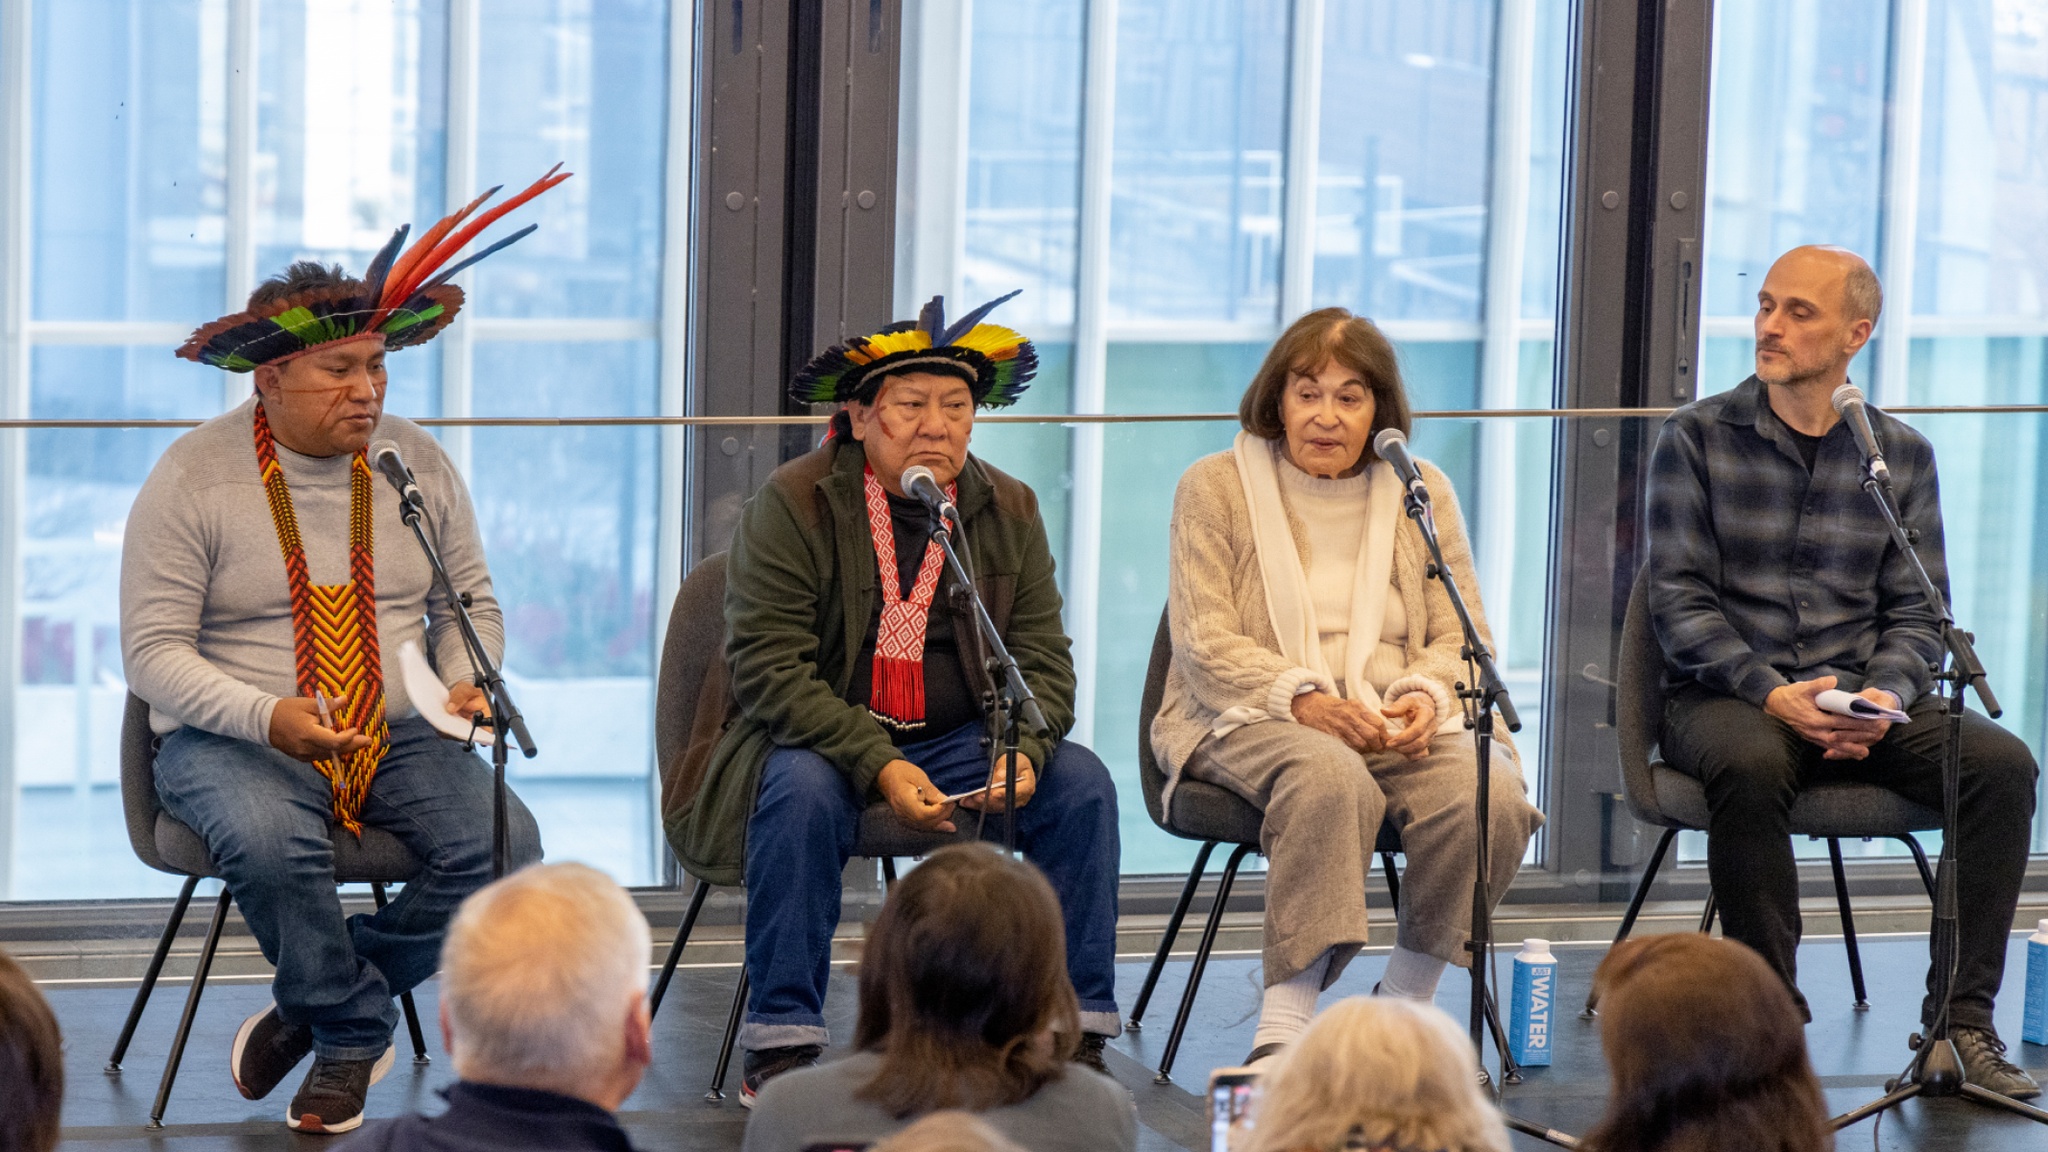 Four panelists sit on a stage with large windows behind them. On the left are Dario and Davi Kopenawa, two Yanomami men who wear head dresses made of colorful feathers. On the right of them sits artists Claudia Andujar, a Brazilian white woman with brown hair wearing an off white outfit. To her right is curator Thyago Nogueira, a white Brazilian man wearing a dark button down shirt in a check plaid pattern.